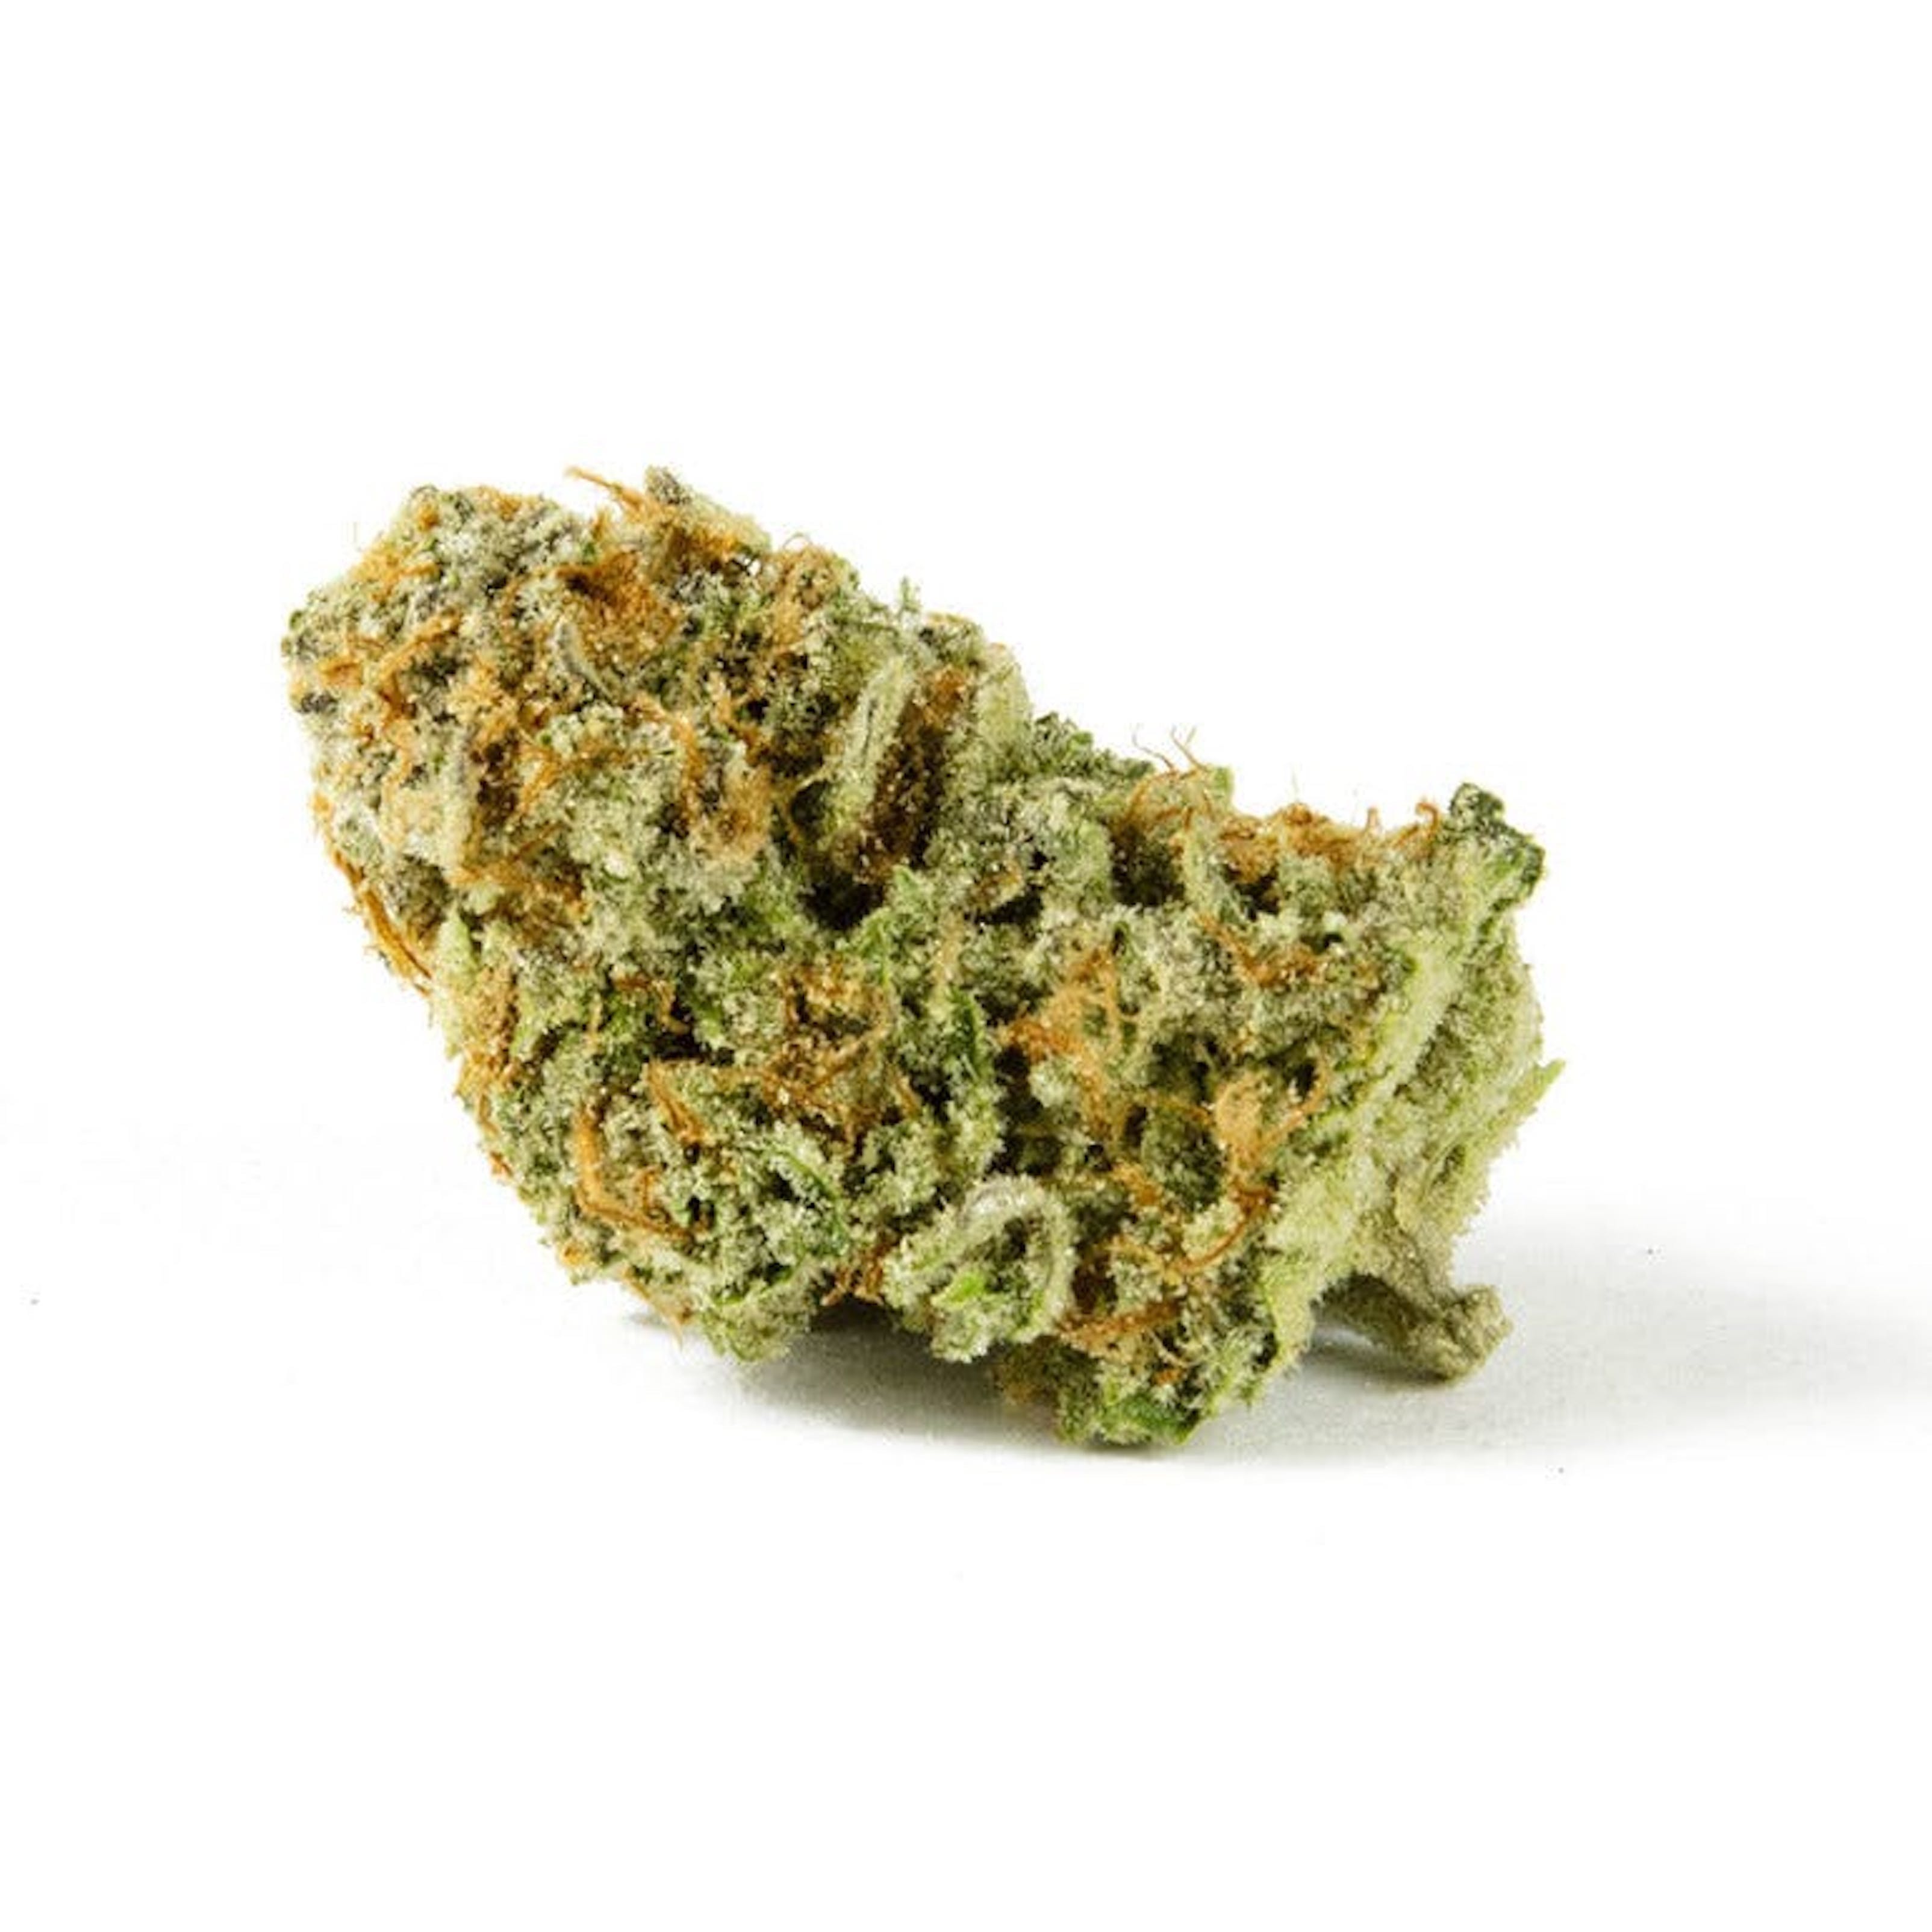 Smooth Power Plant 3.5g $36